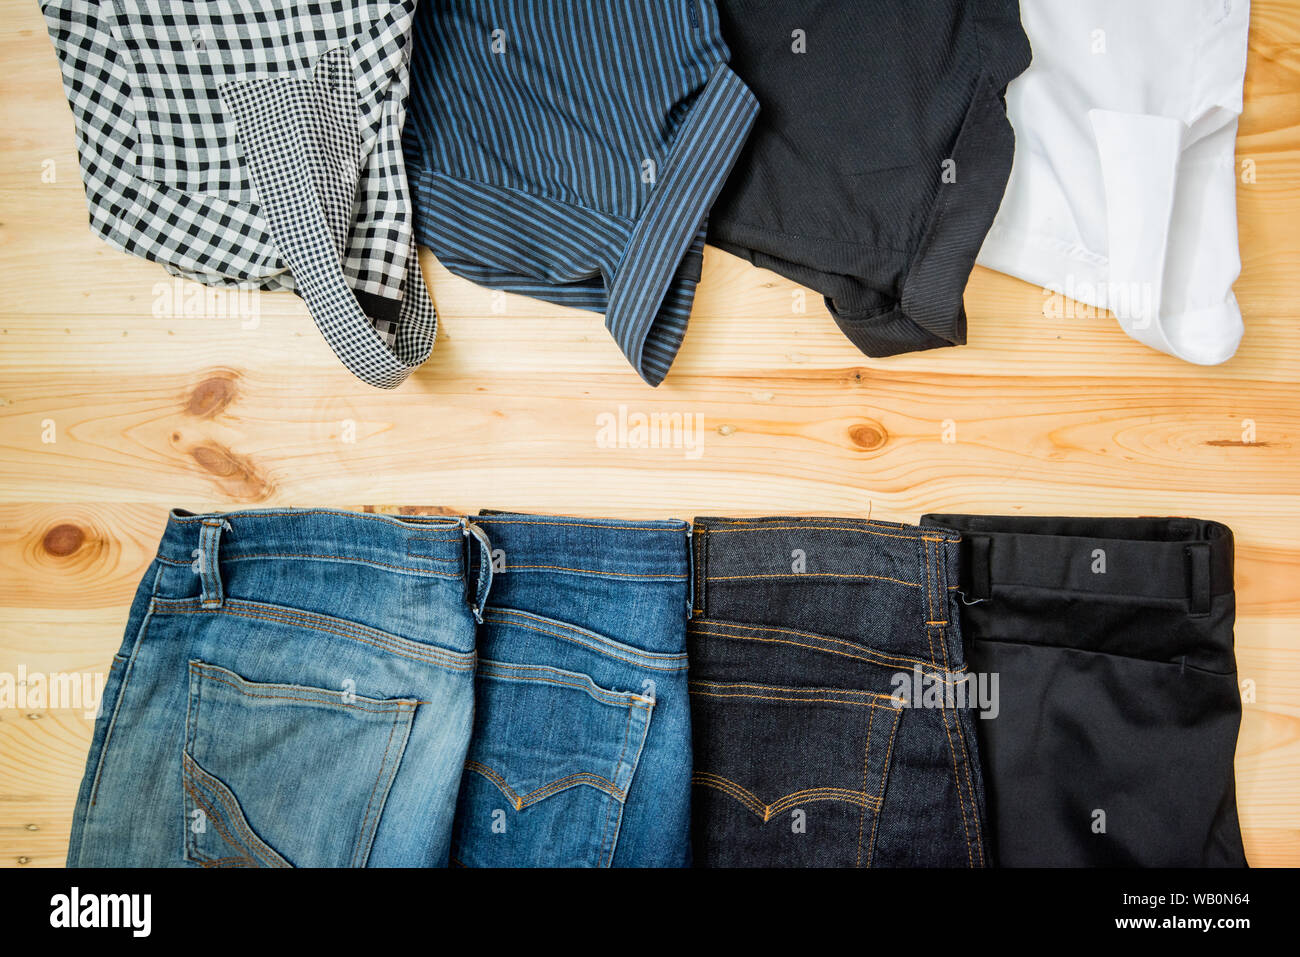 man casual outfits fashion accessories wooden table, jeans Stock Photo